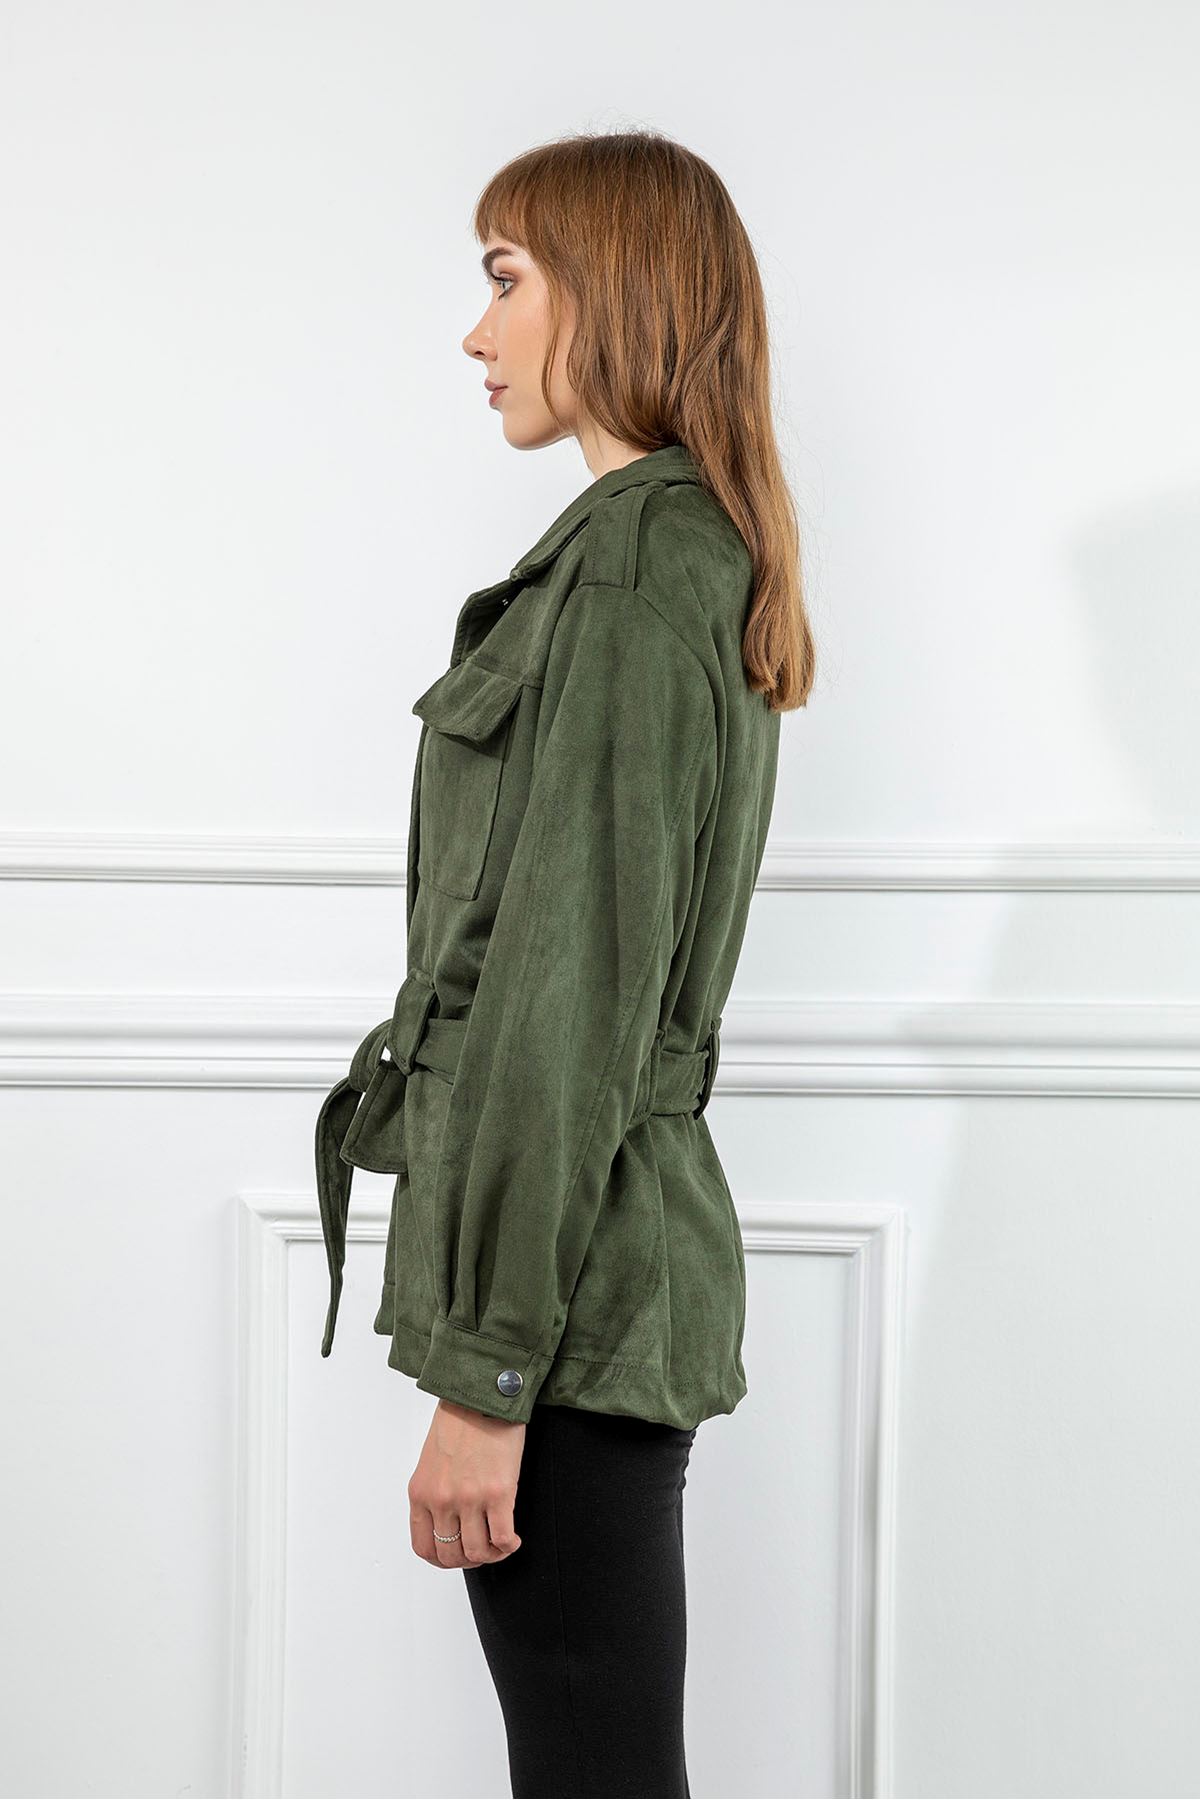 Suede Fabric Long Sleeve Shirt Collar Full Fit Belted Women Jacket - Khaki 